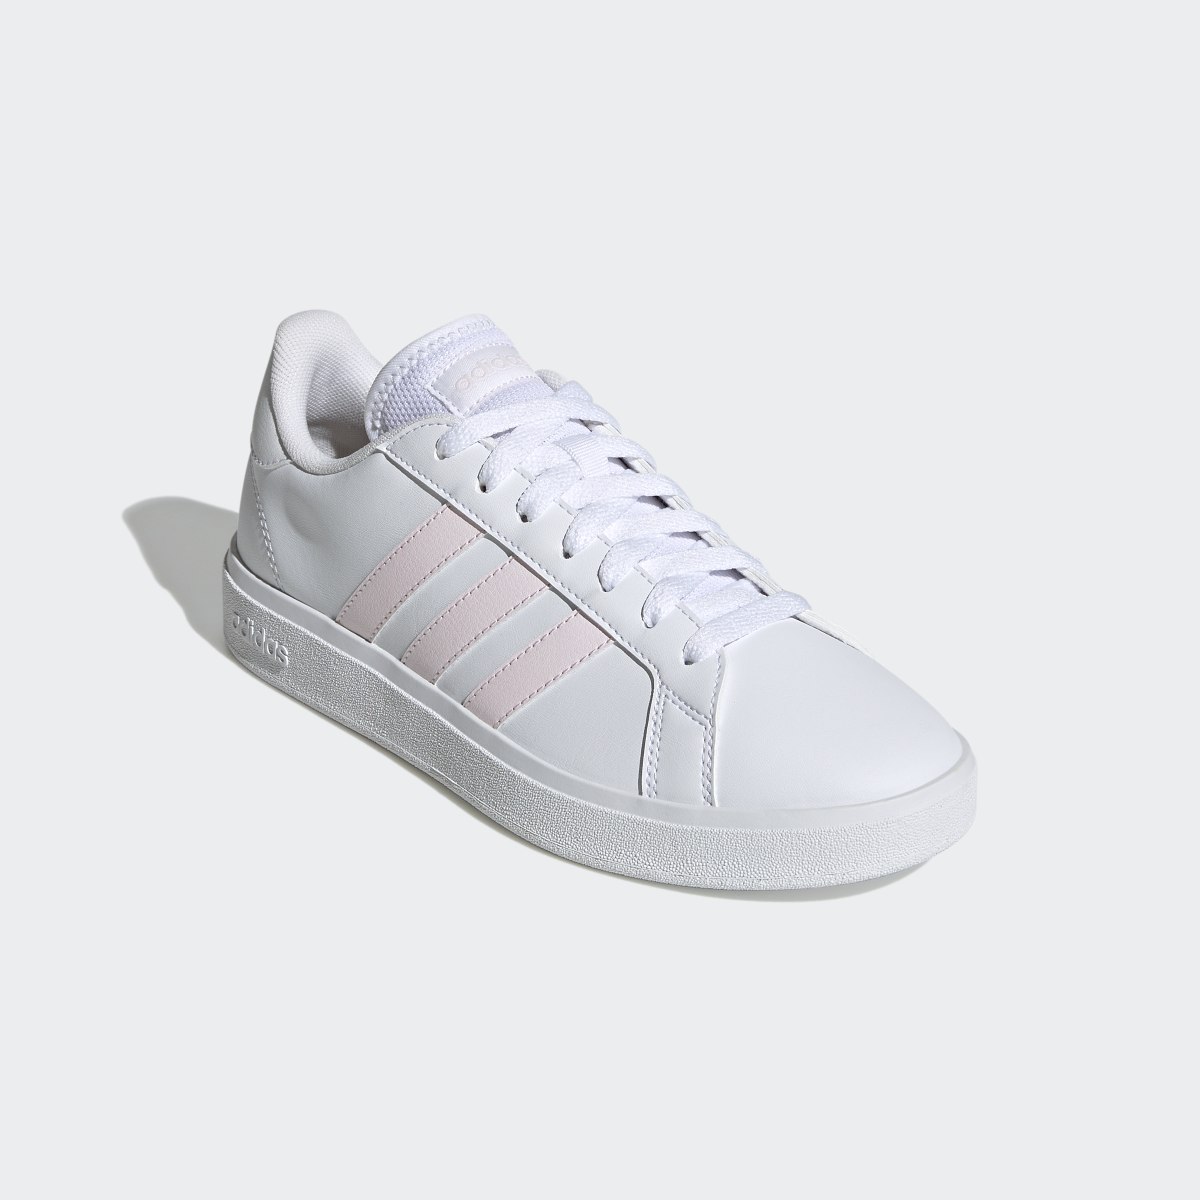 Adidas Grand Court TD Lifestyle Court Casual Shoes. 5